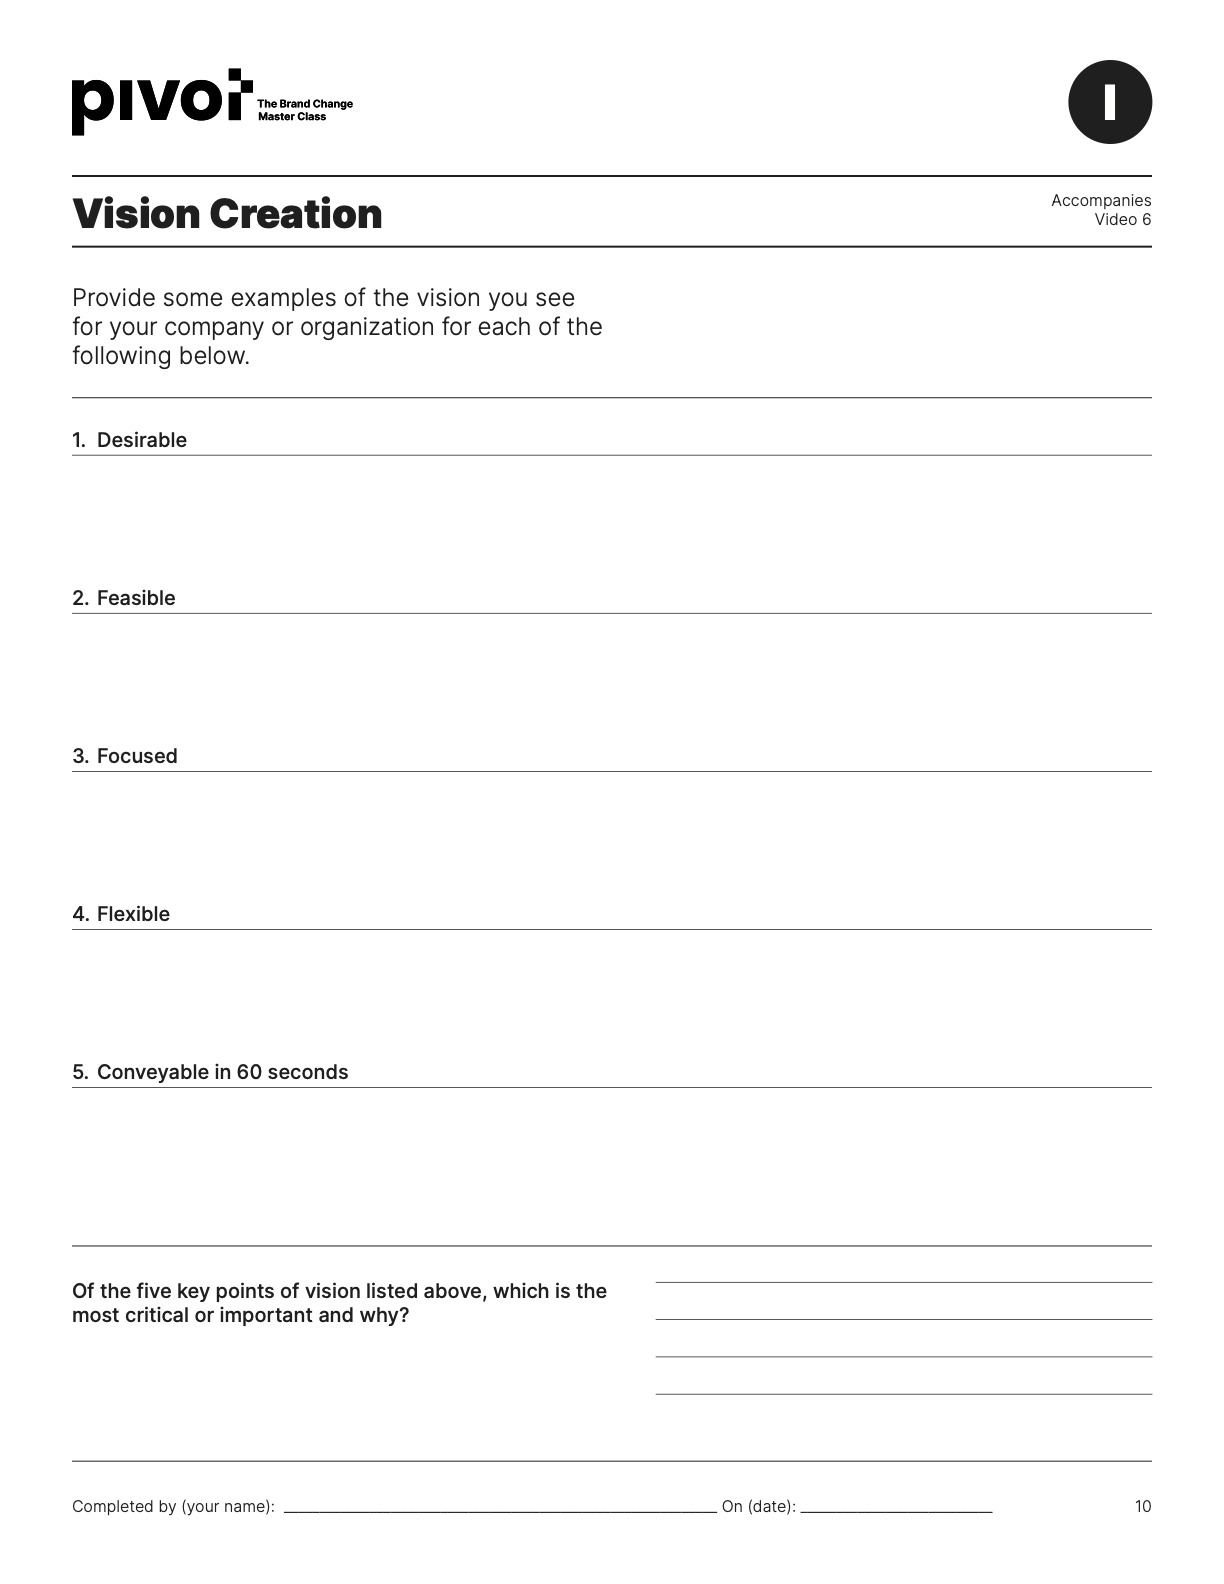 The Vision Creation page from the Pivot Workbook